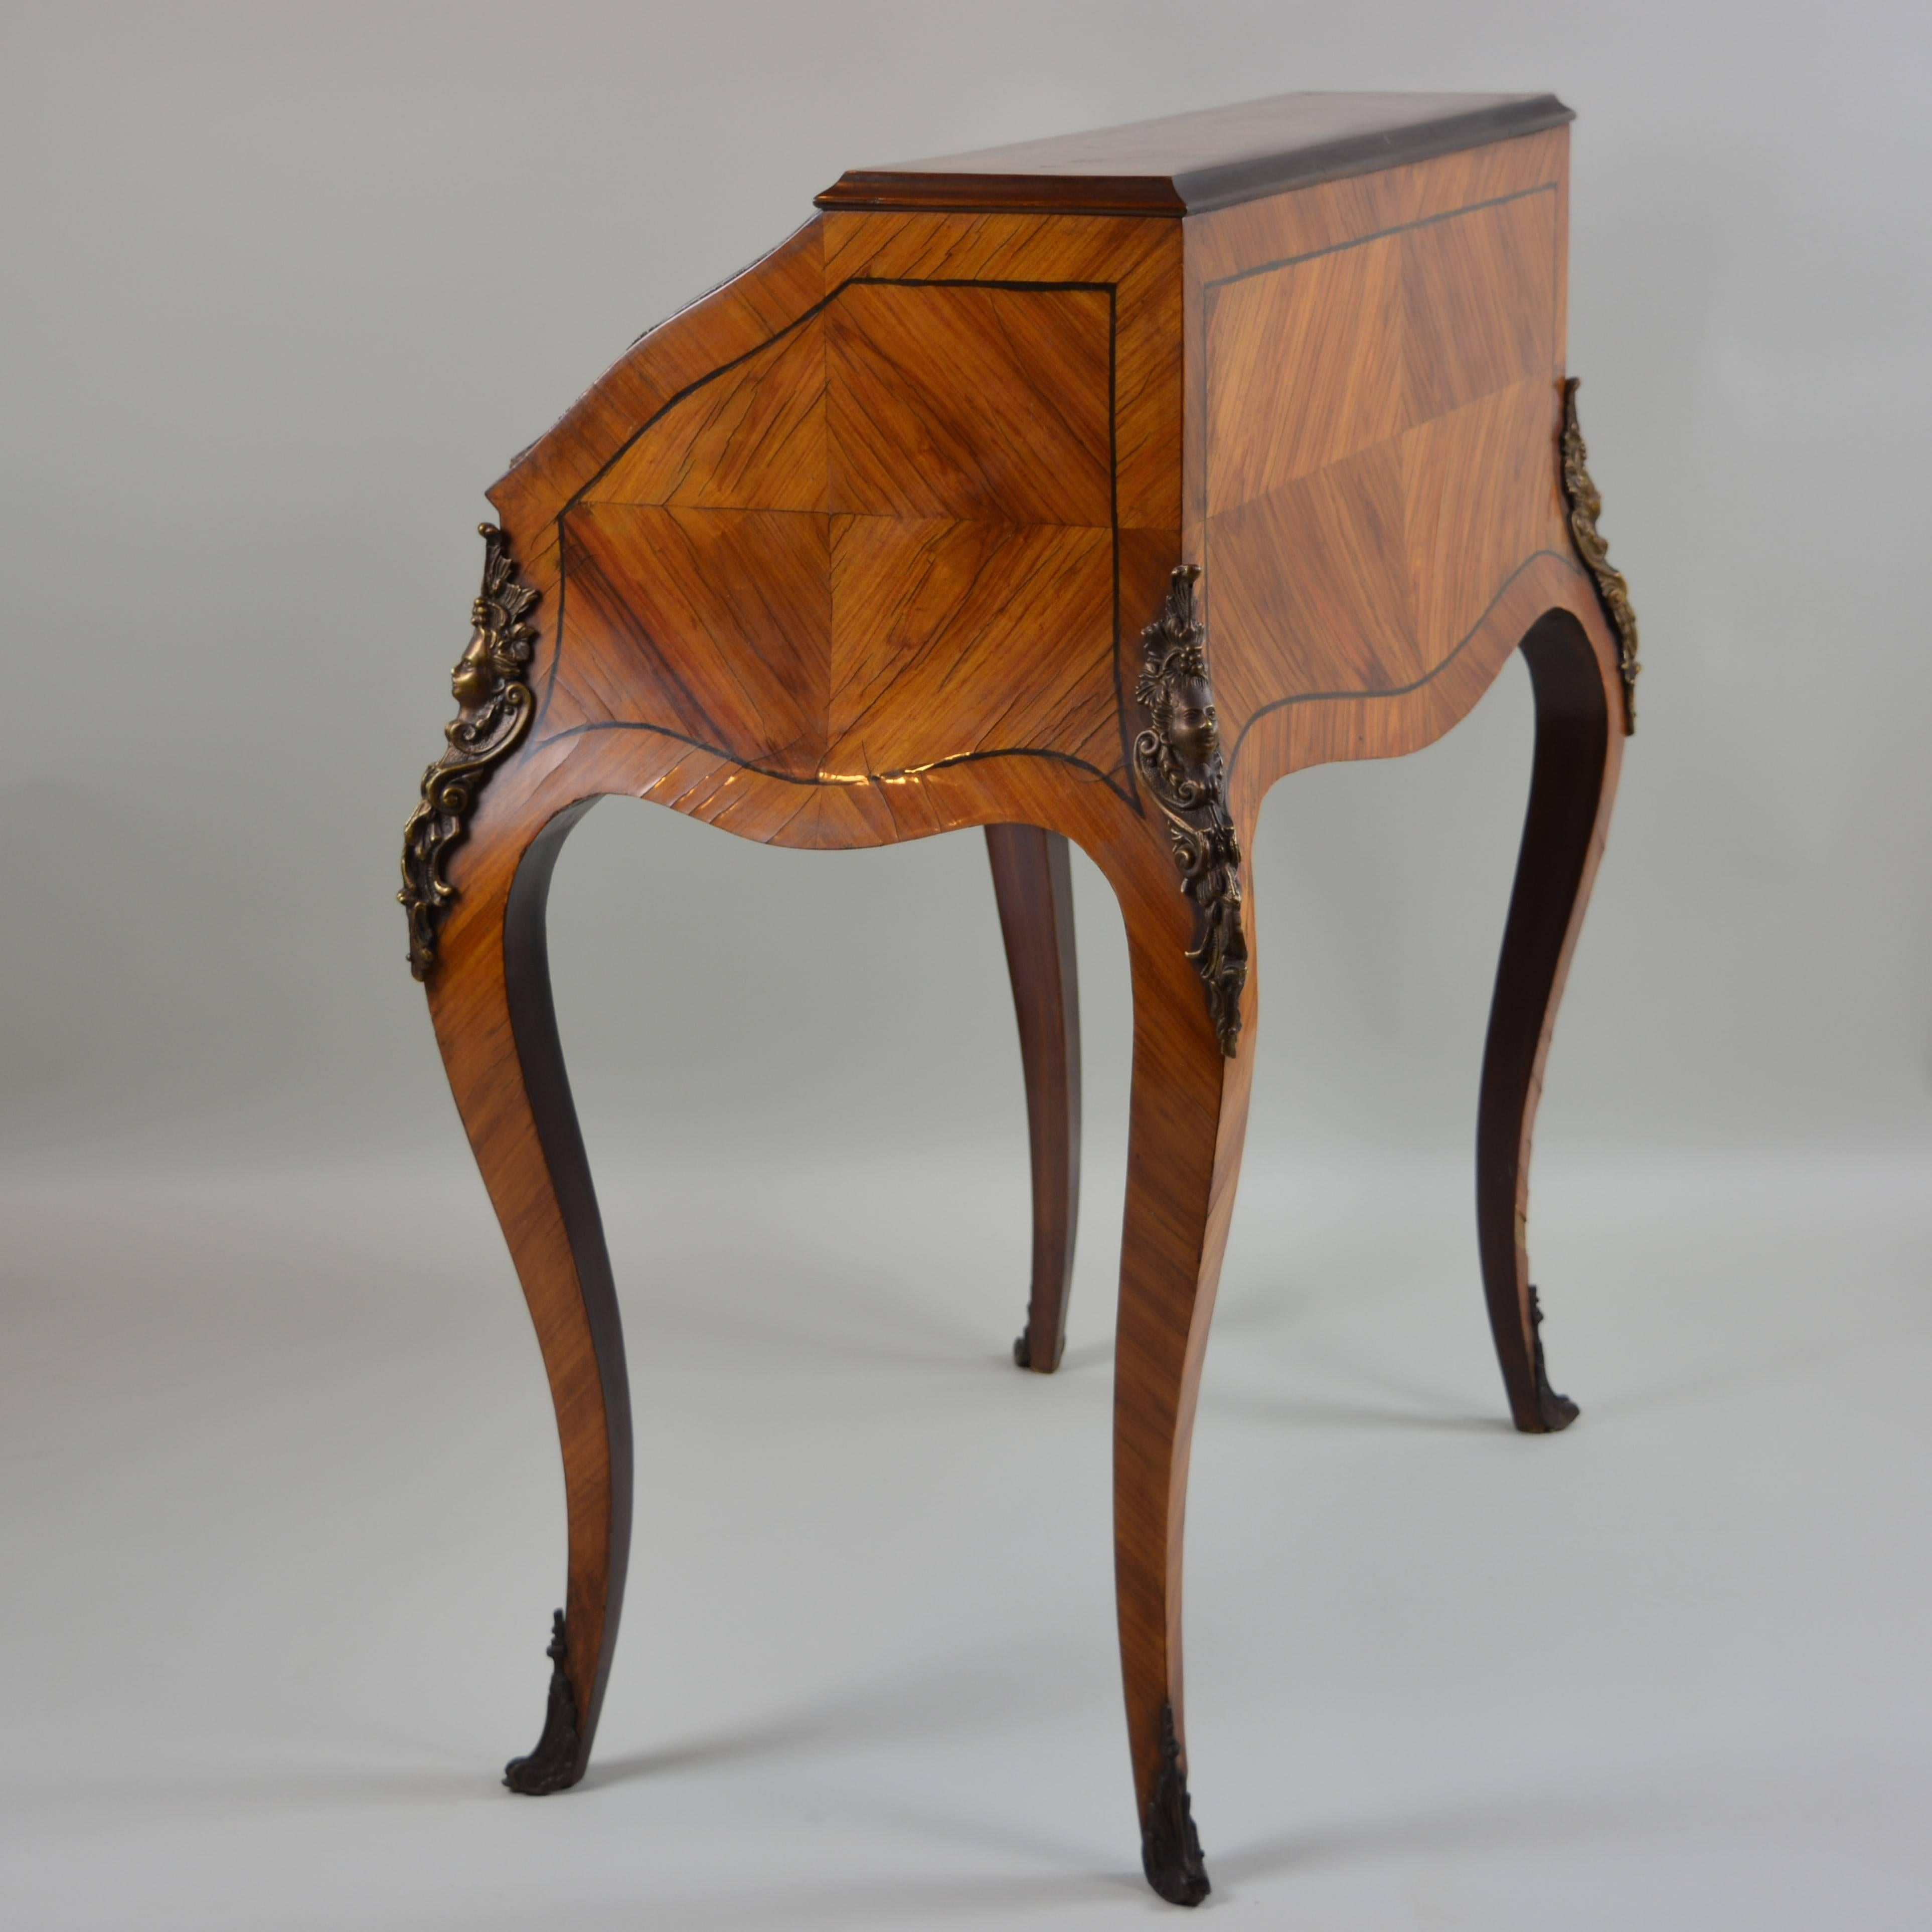 Beautiful flowing curves and rich veneers make this elegant little desk exceptionally pleasing to the eye. With fancifully curved legs and plentiful brass adornments, it hides its functional features well: the full-width front storage drawer, the